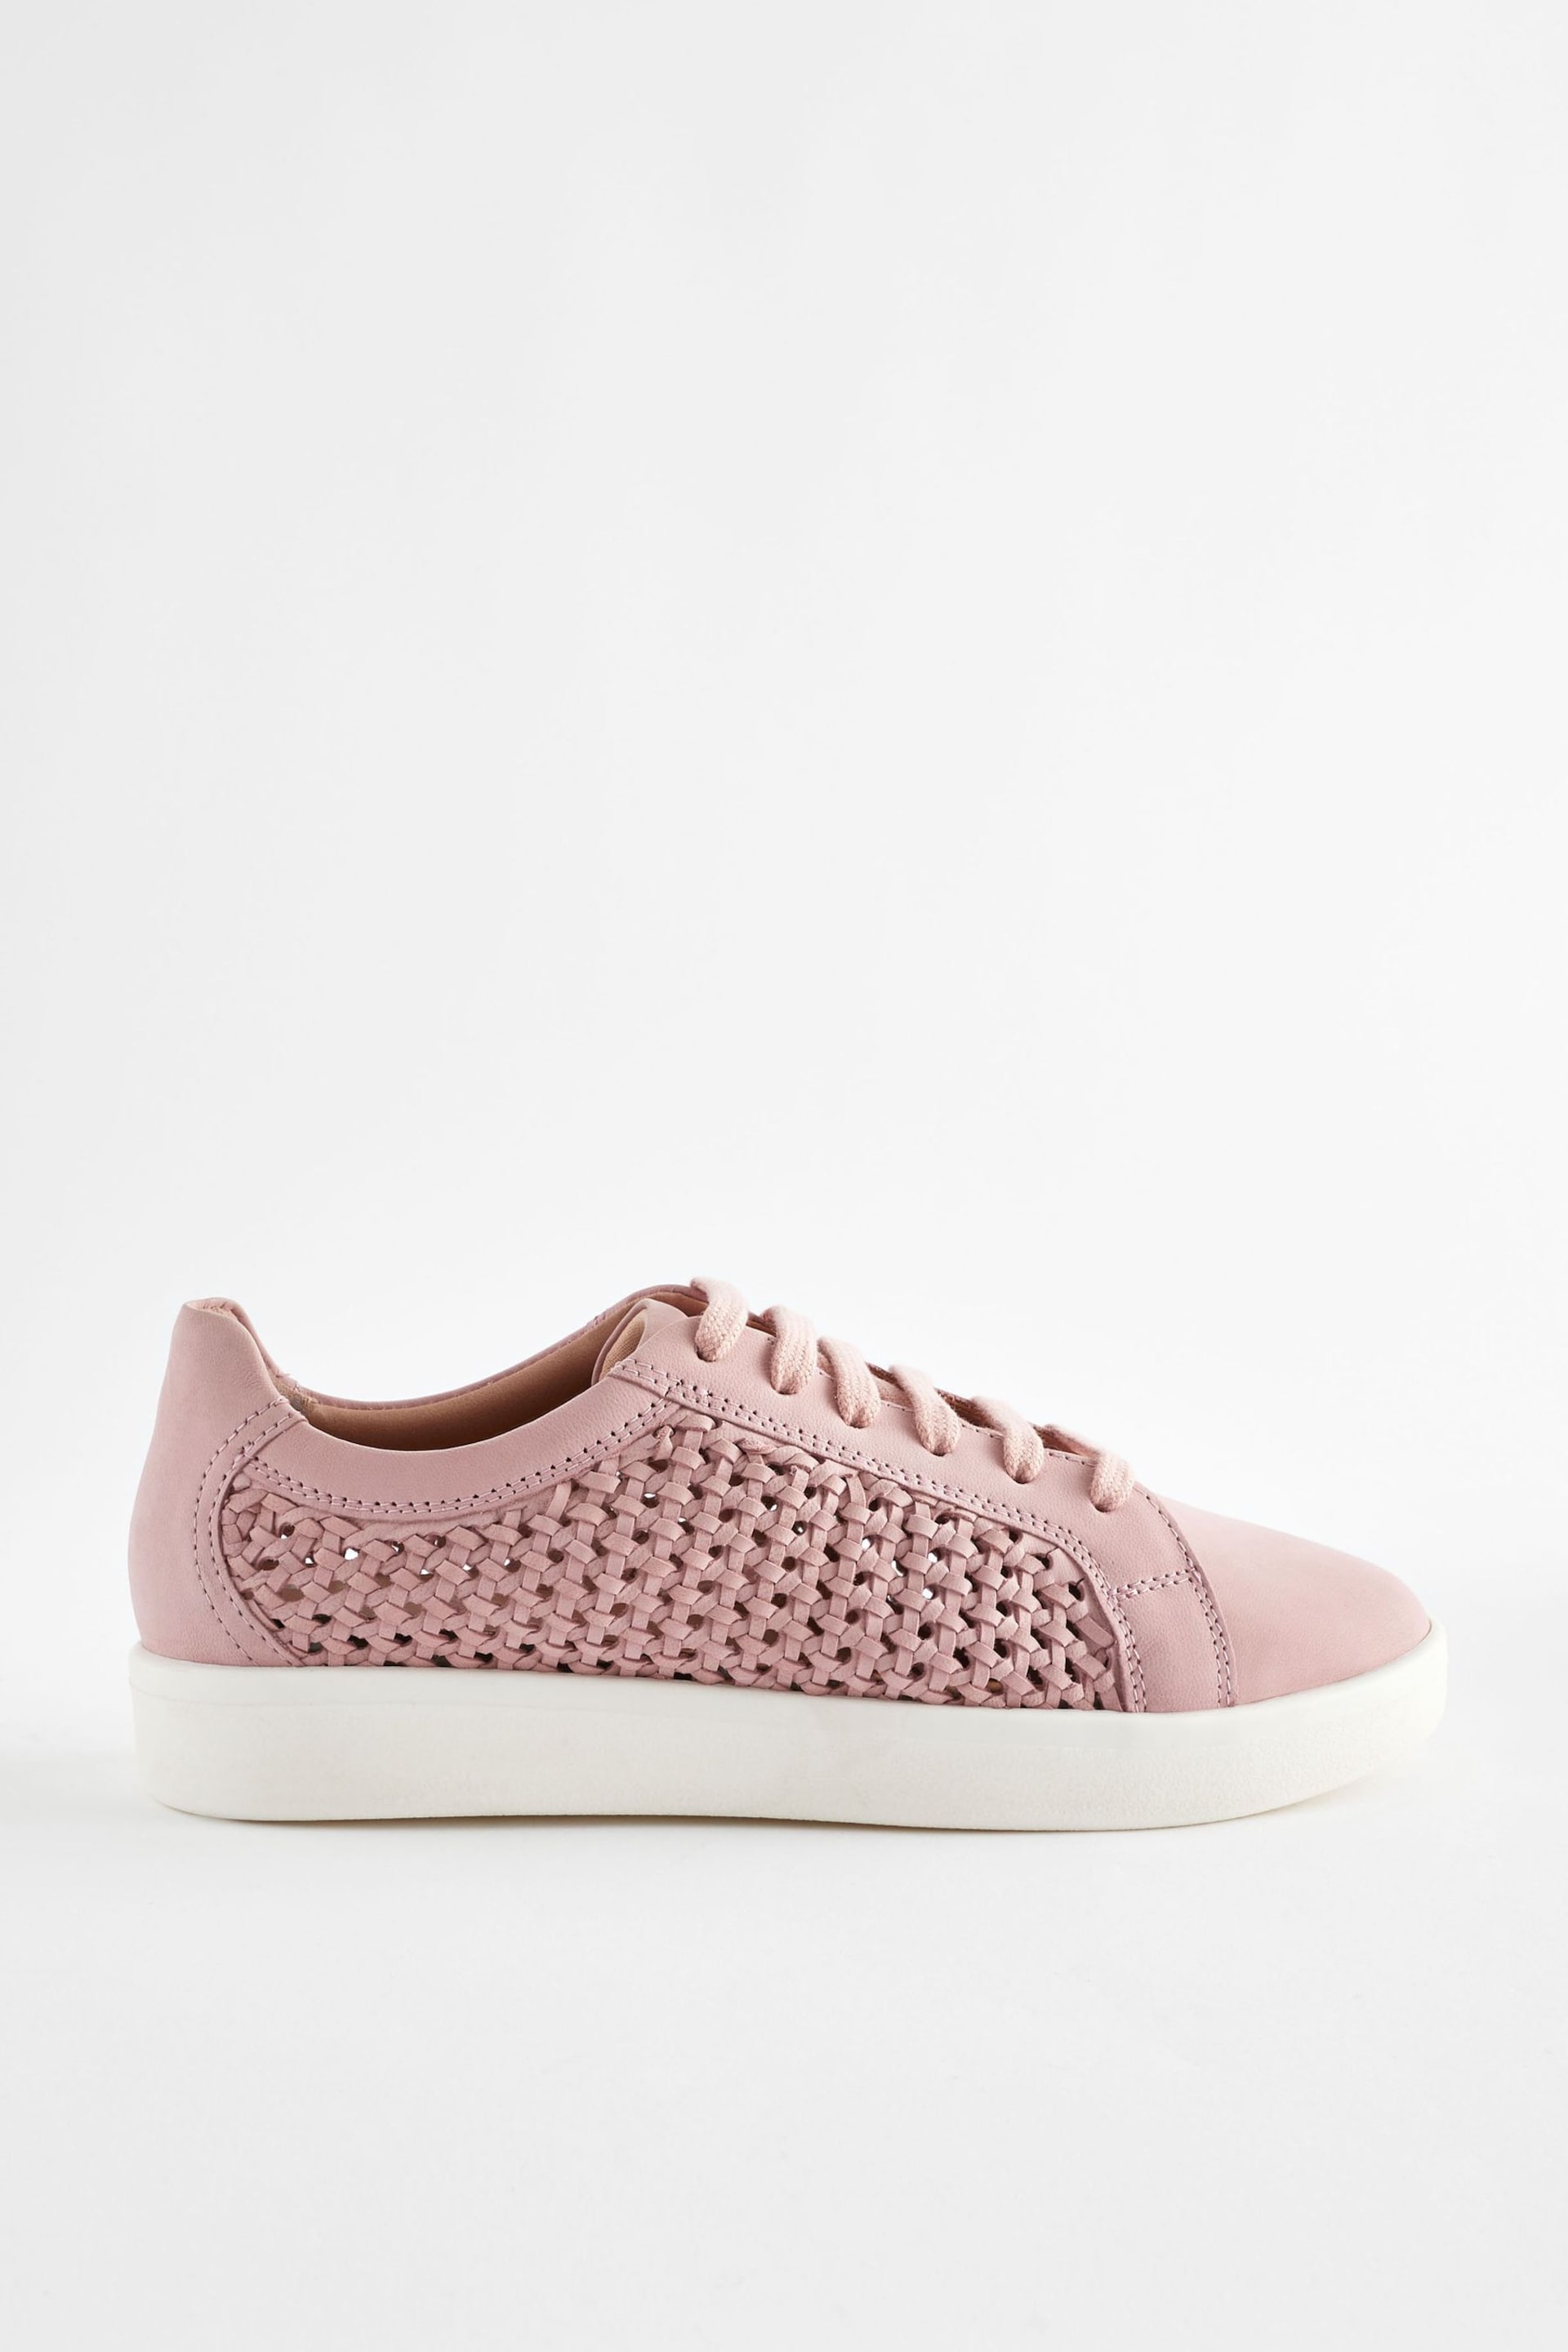 Pink Signature Leather Weave Lace-Up Trainers - Image 3 of 8